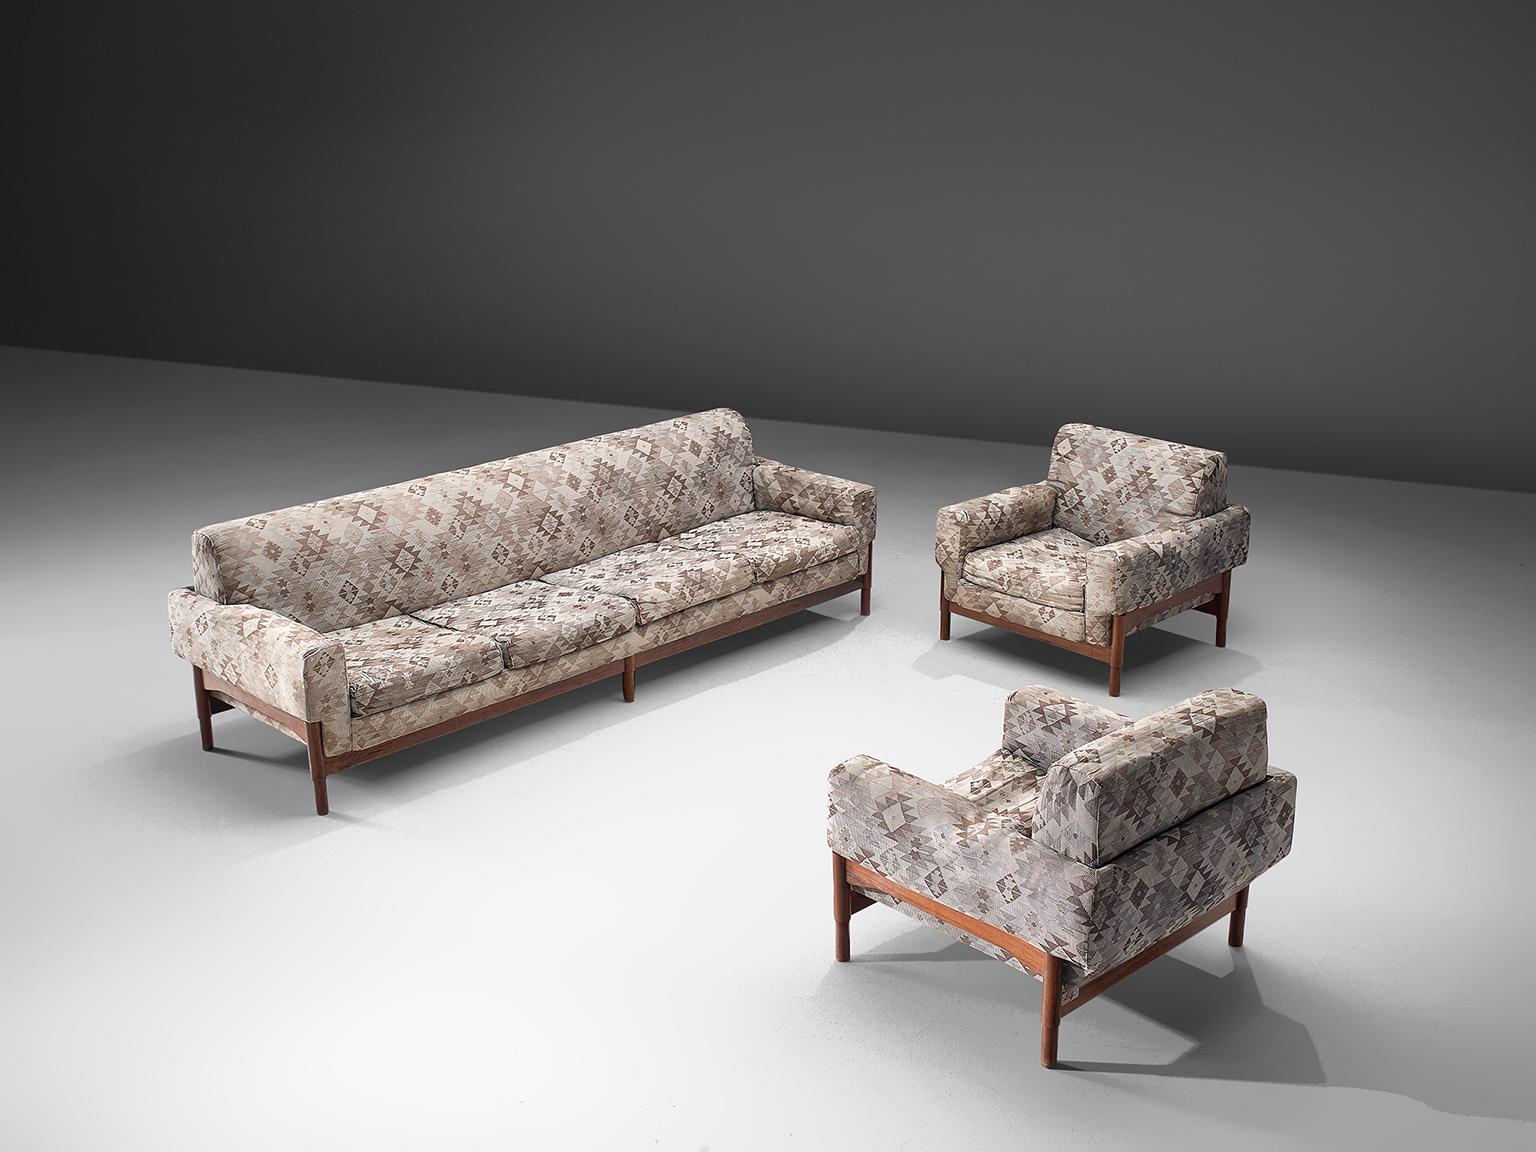 Saporiti, lounge set in rosewood and fabric, Italy, 1960s.

This set is equipped with a rosewood frame and a retro sand to grey colored upholstery. The sofa and lounge chairs are designed in a modest, yet distinguished look. The set feature a